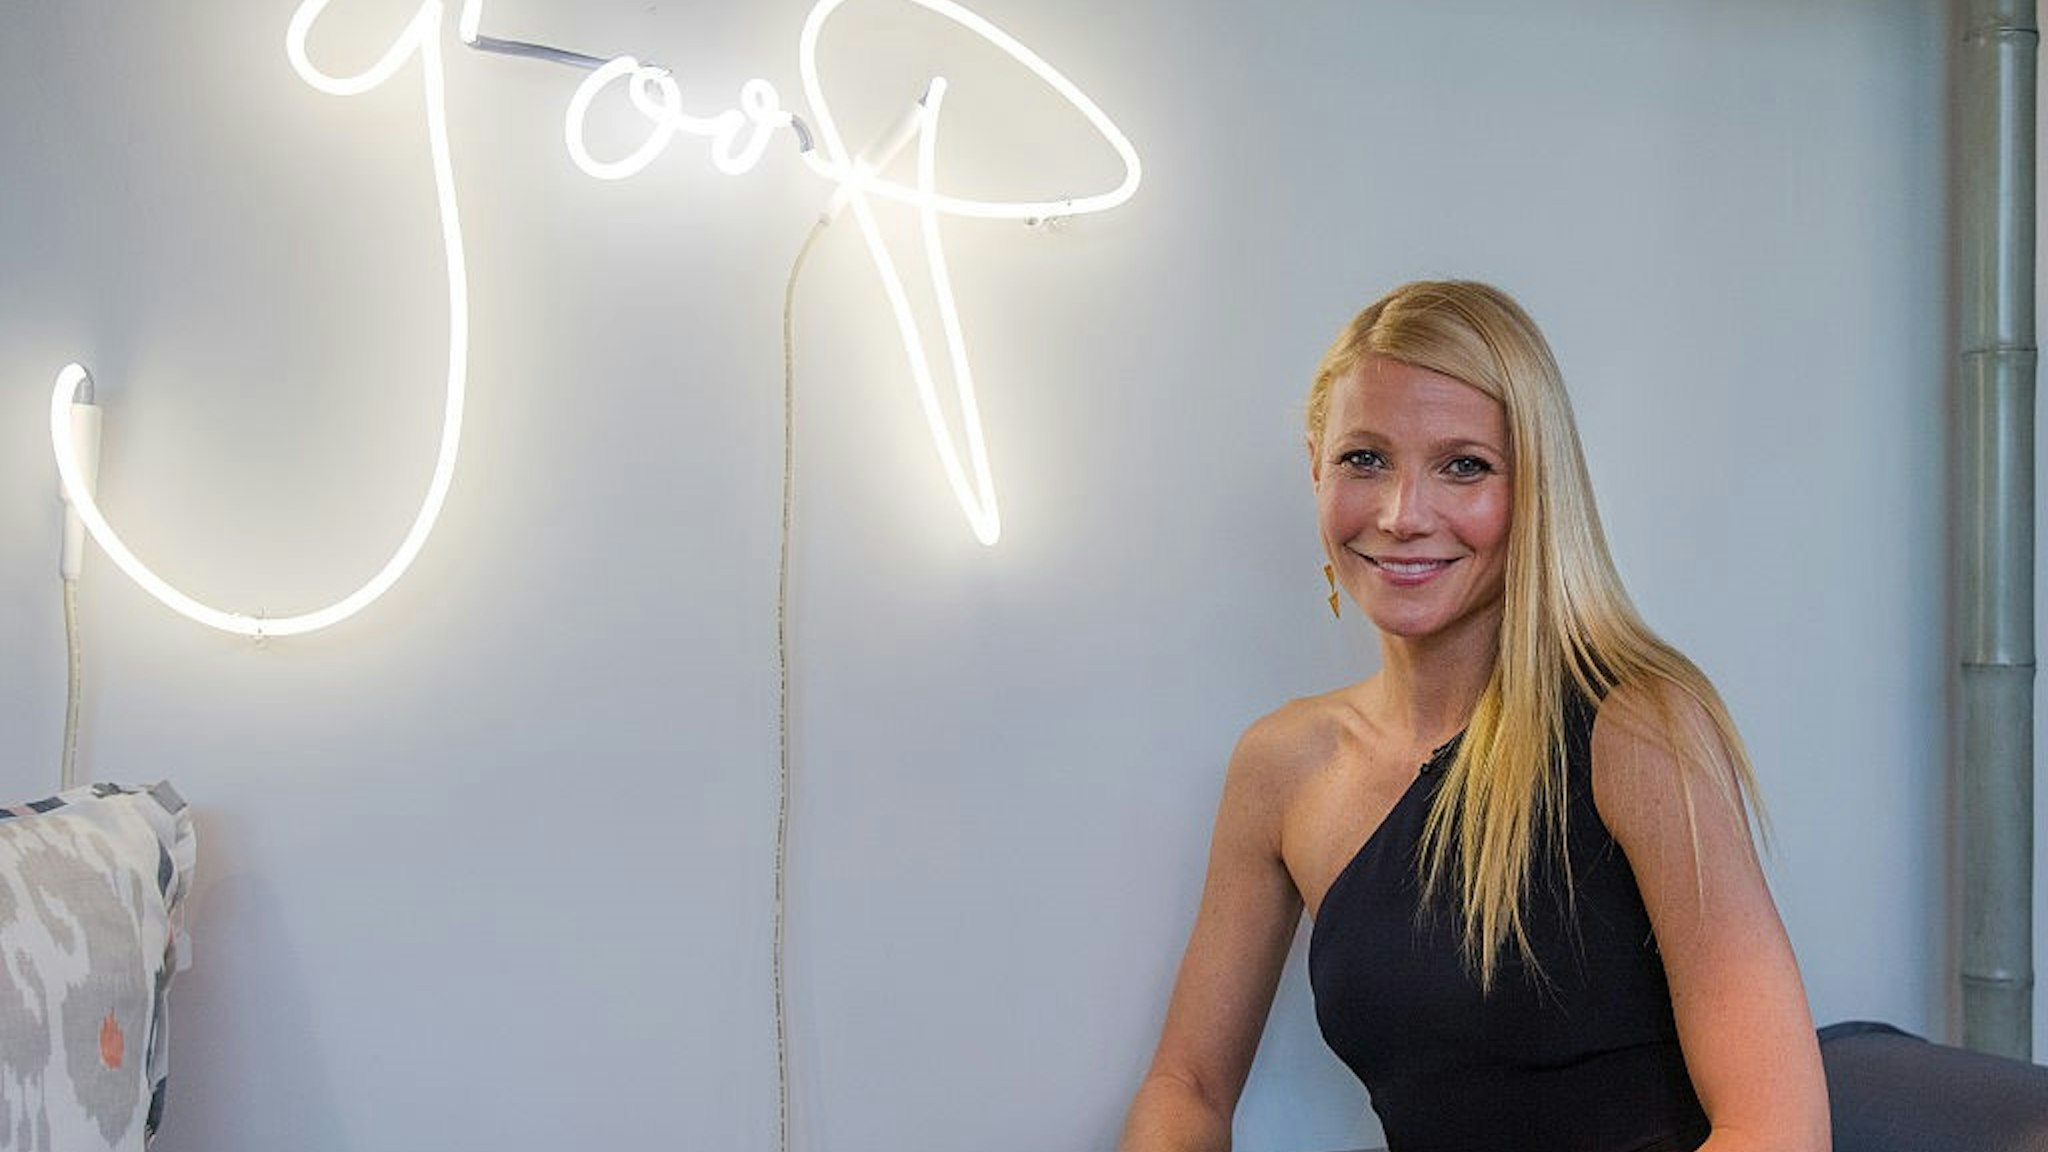 Gwyneth Paltrow attends the goop pop Dallas Launch Party in Highland Park Village on November 20, 2014 in Dallas, Texas.